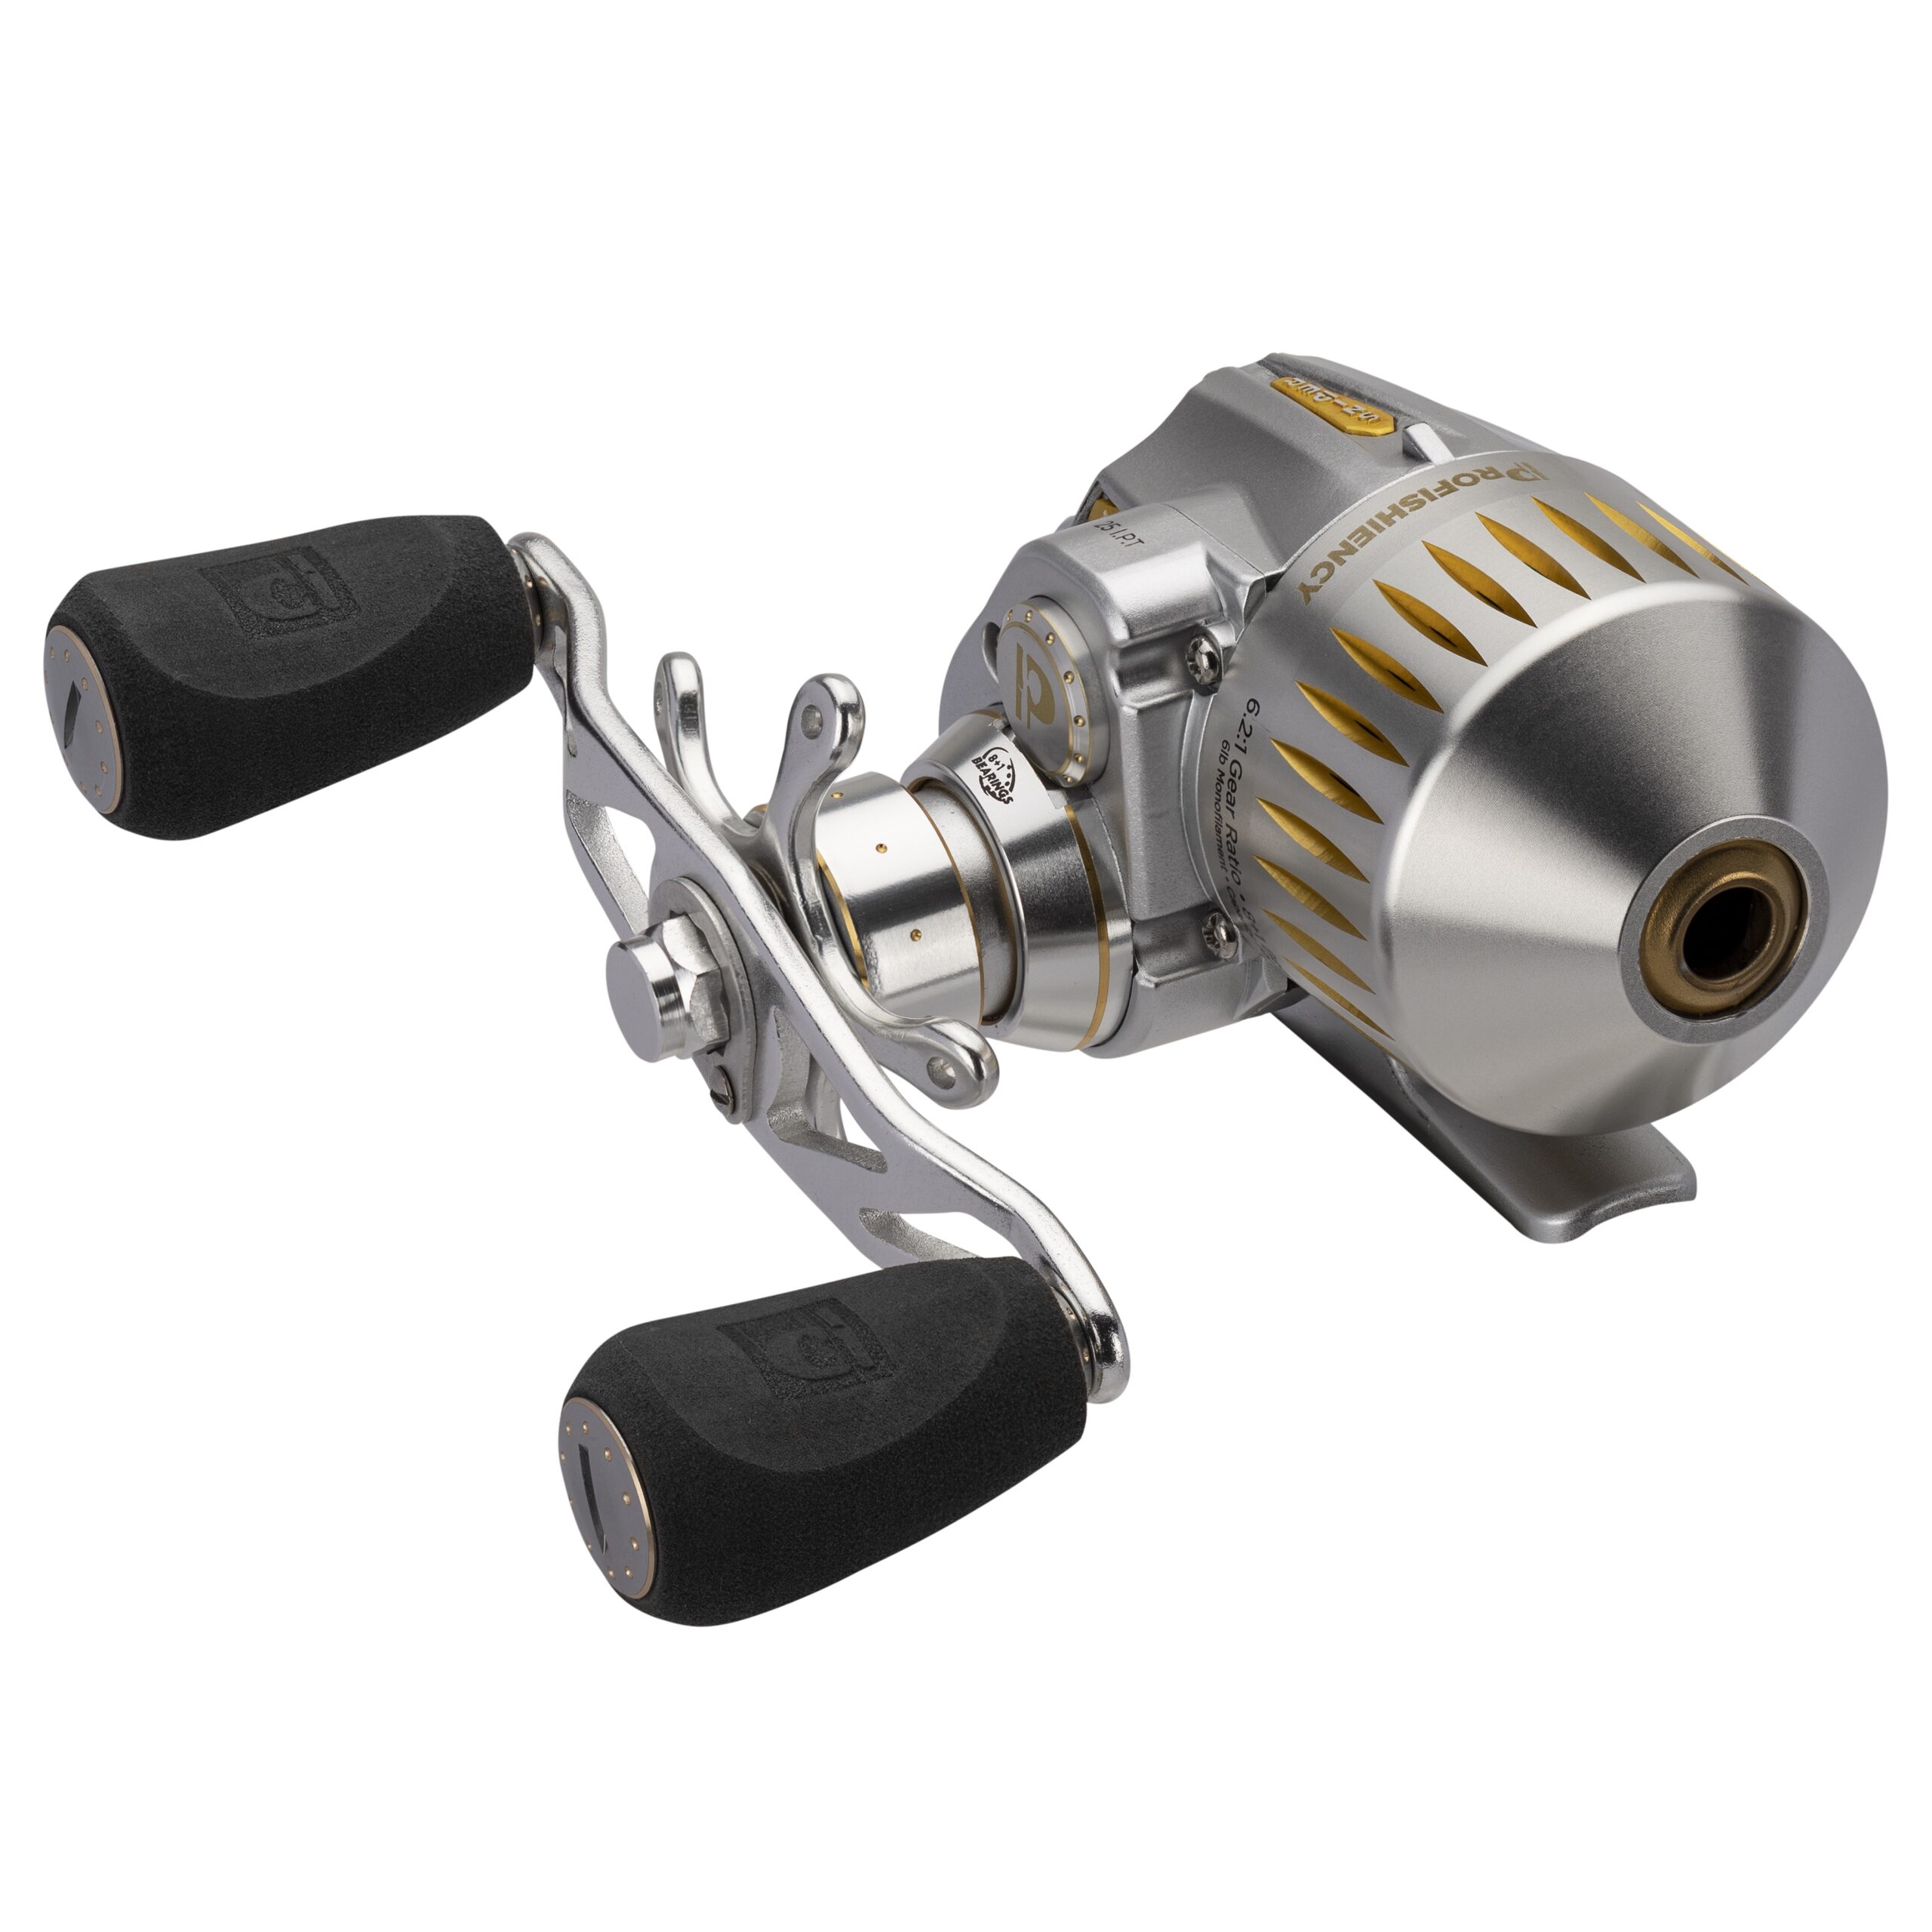 ProFISHiency Micro Sniper Spincasting Reel , Up to $4.00 Off with